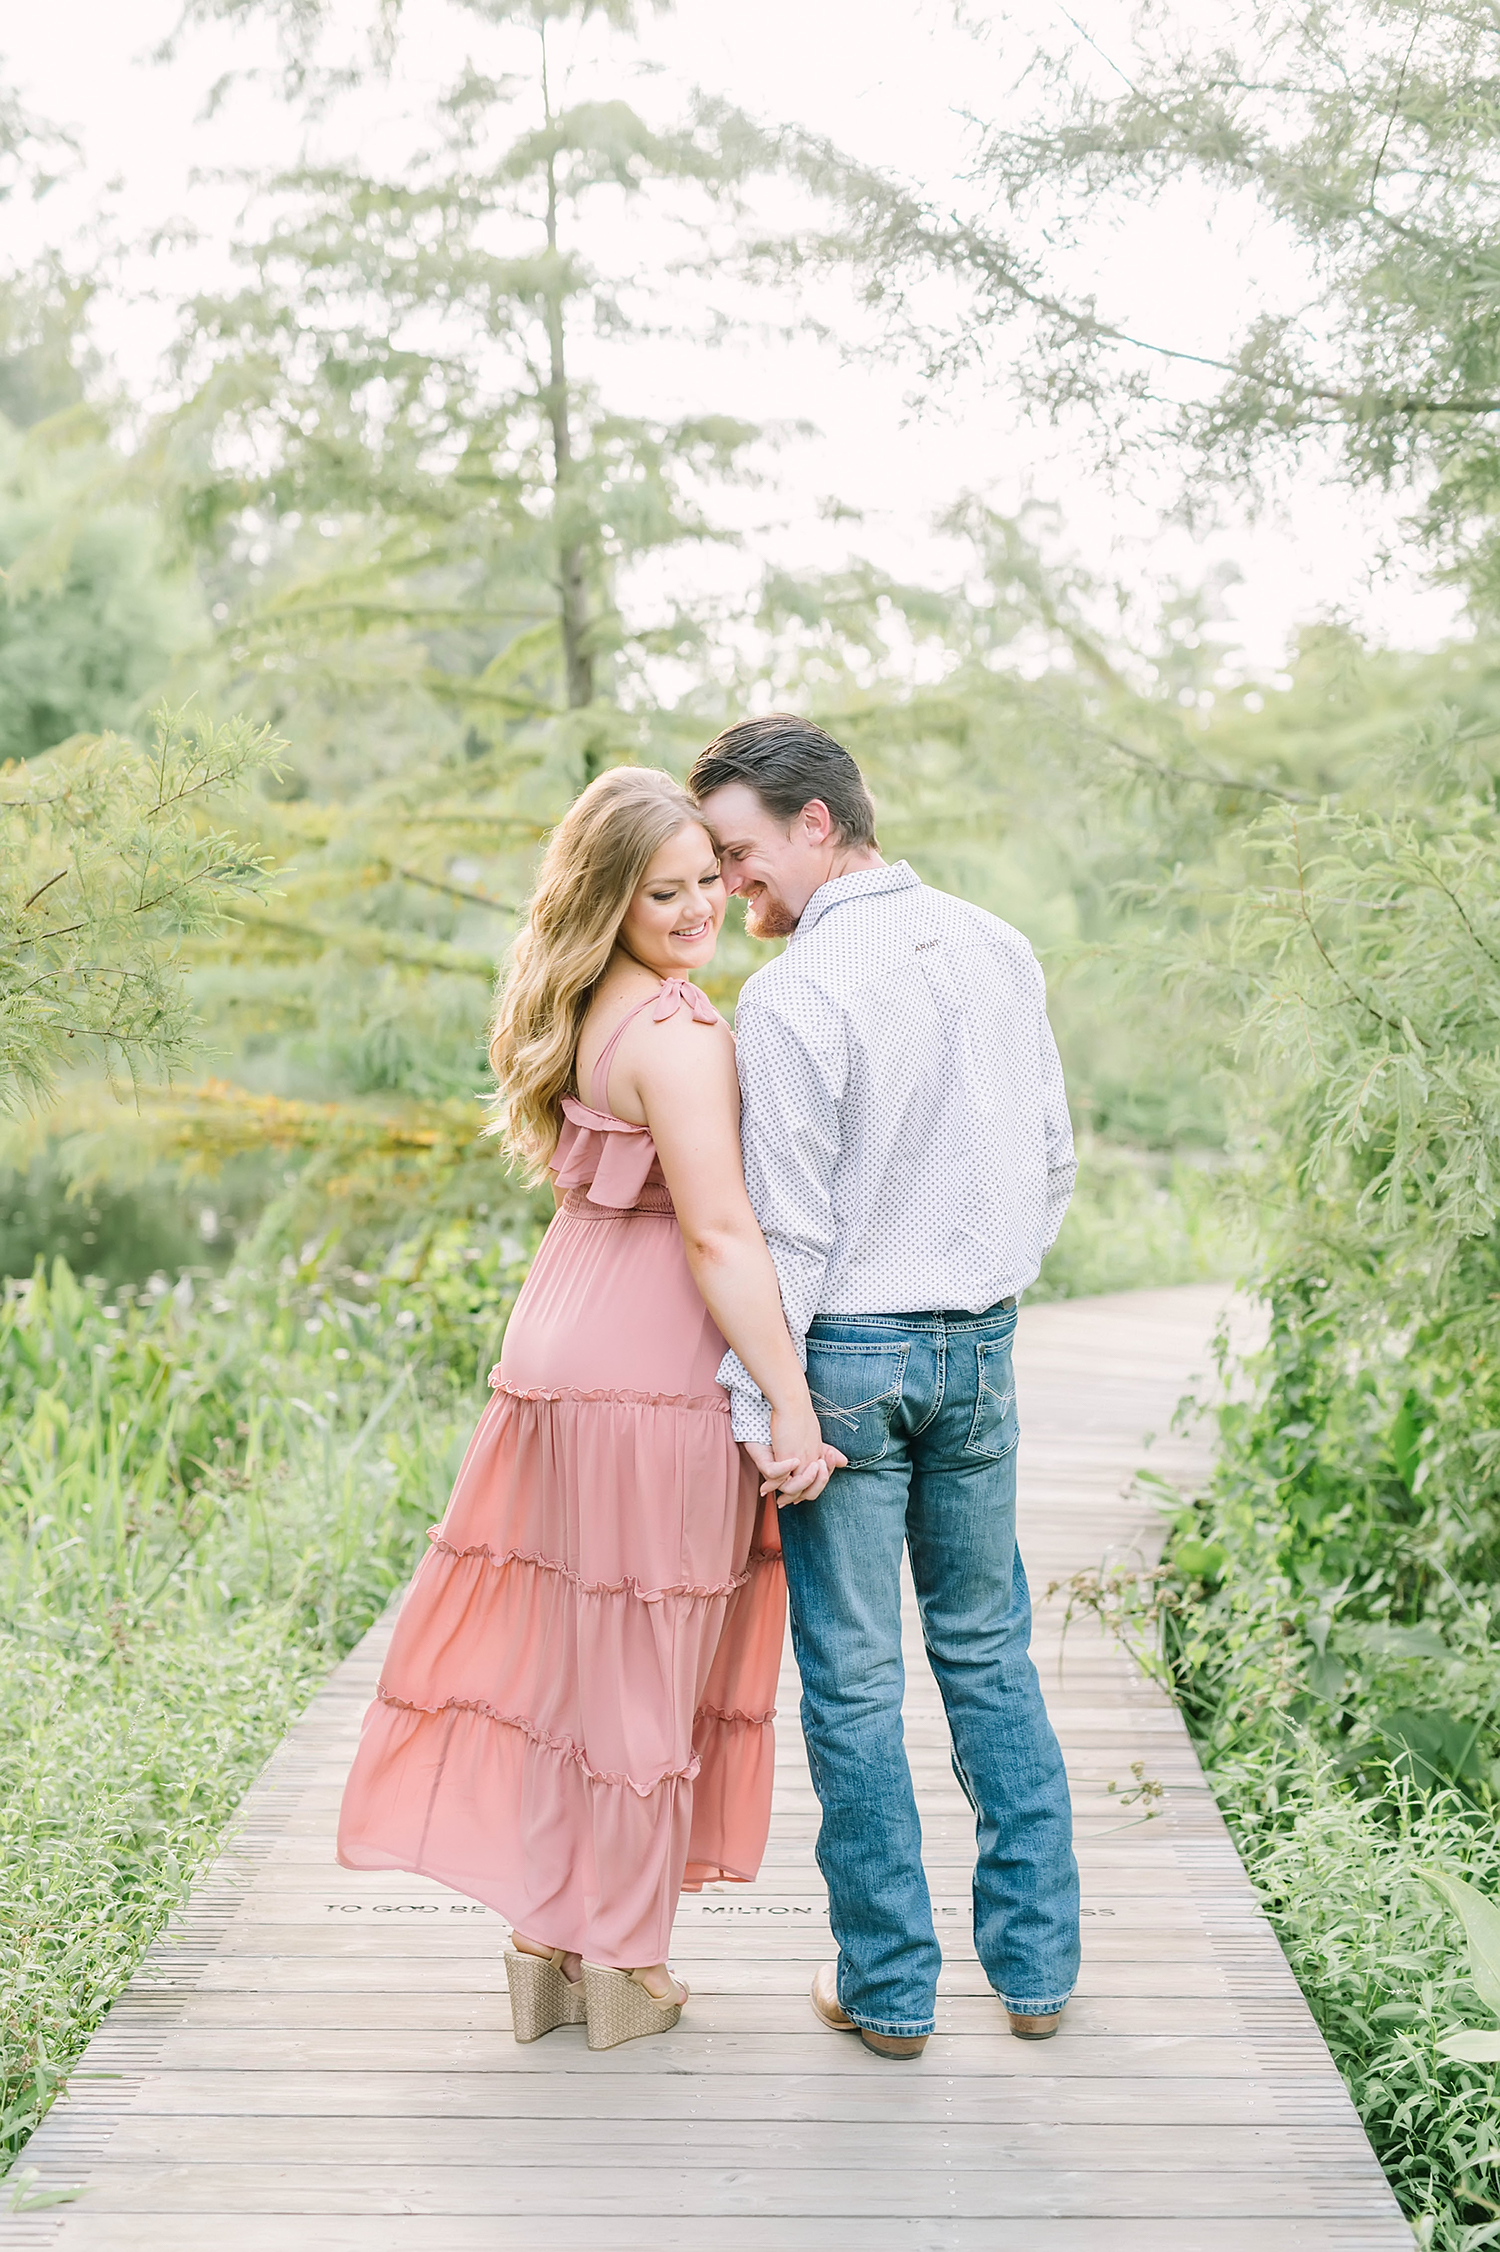 A woman in a pink dress holds hands and stands on a bridge with her fiance as she looks over her shoulder in Houston, Texas by Christina Elliott Photography. cowboy engagement pictures pink bow tie dress for pic engagement pose ideas wedding annoucement photos #christinaelliottphotography #christinaelliottengagement #houstonengagement #houstonphotographers #houstonarboretum #stillwaterranchwedding #engagementphotos #soontobemarried #outdoorengagments #sayIdo #southernengagements